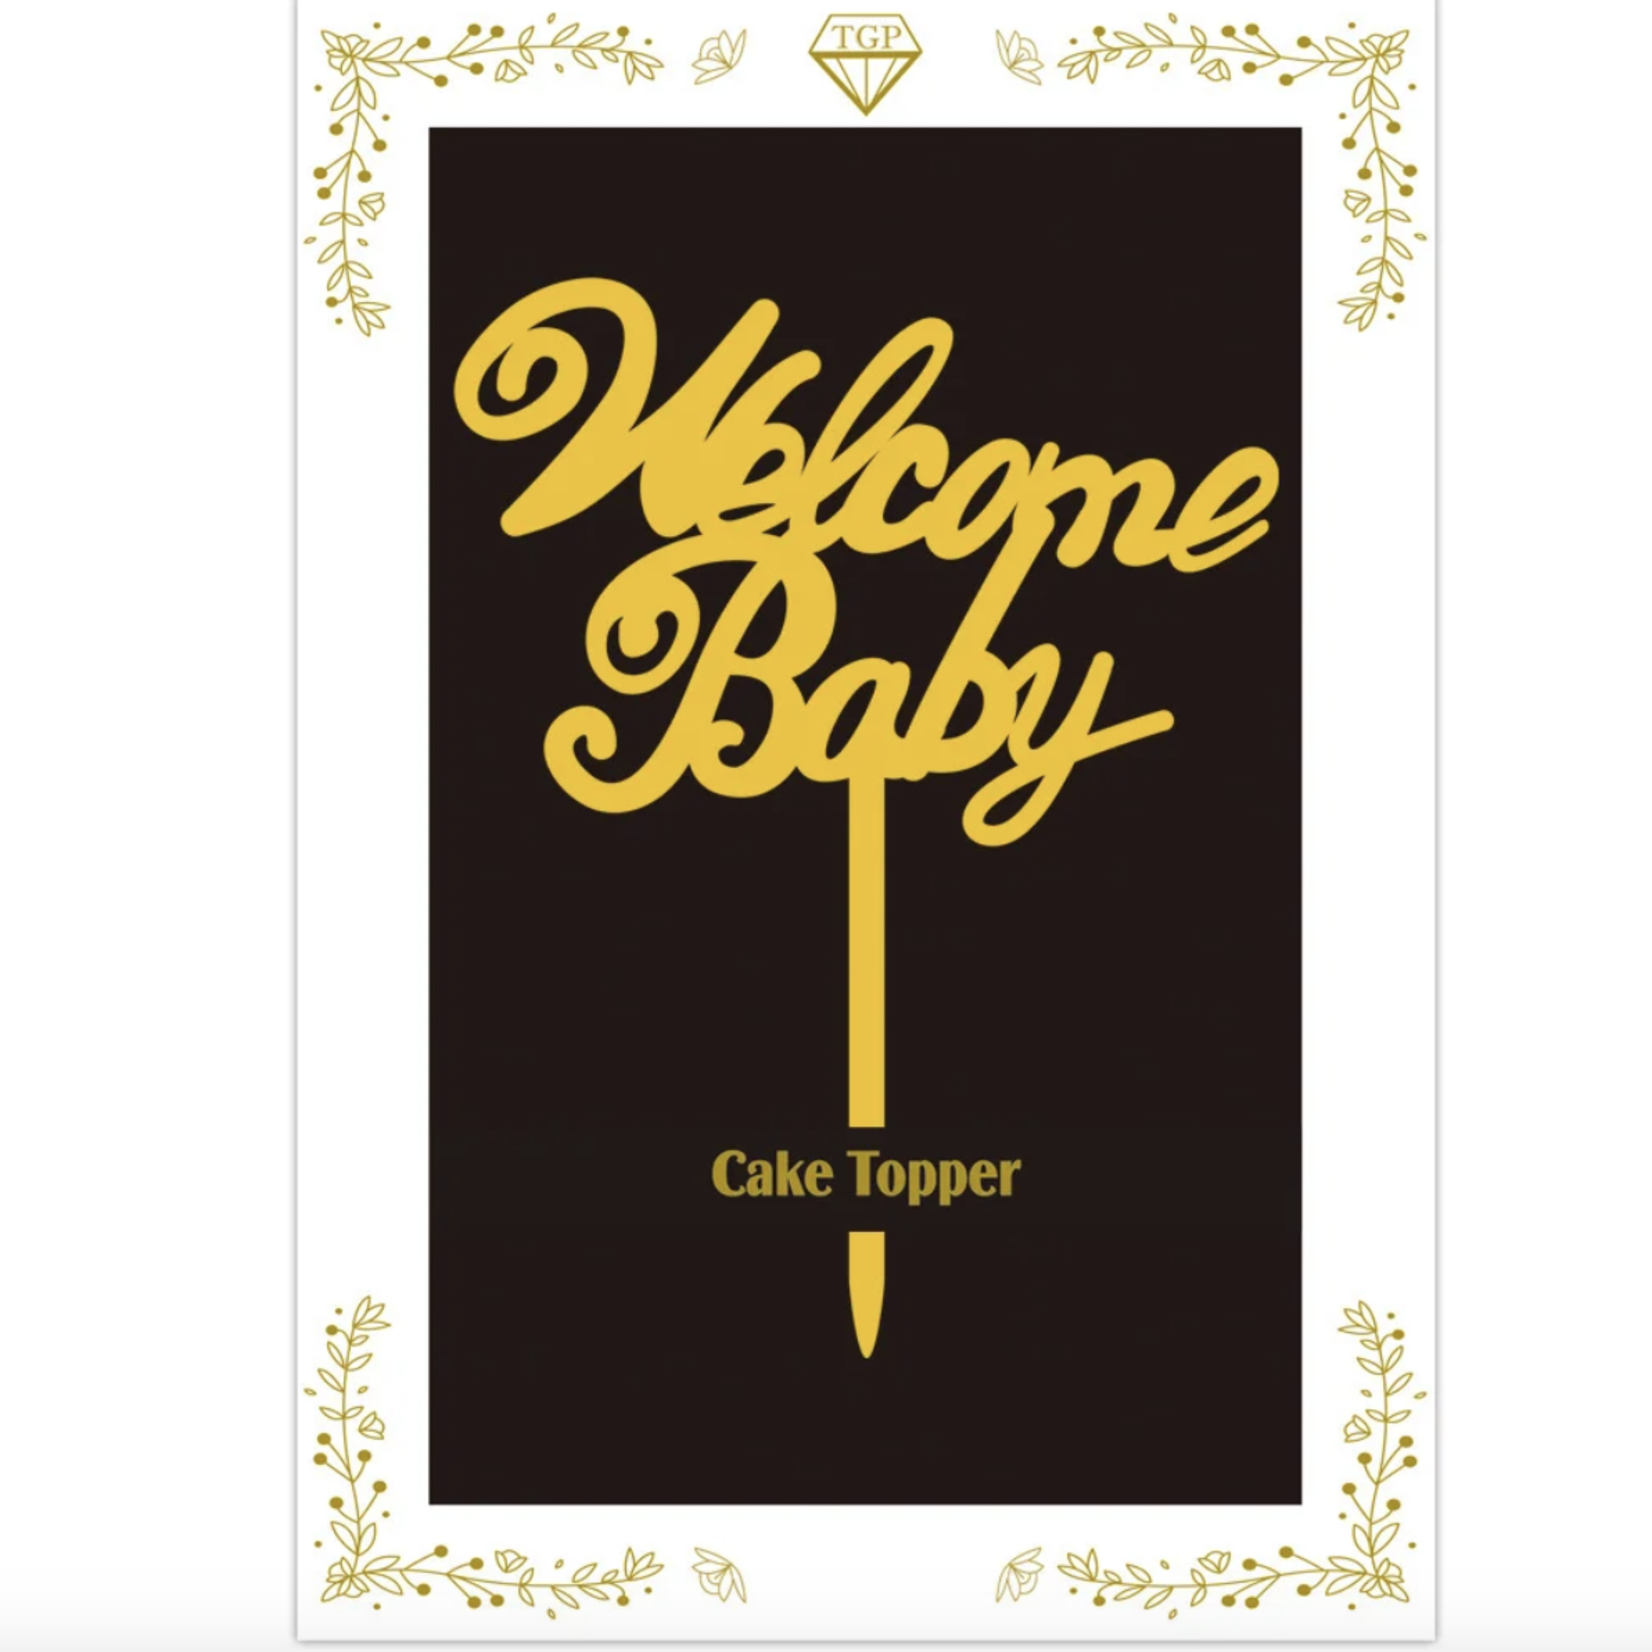 GOLD, WELCOME BABY CAKE TOPPER